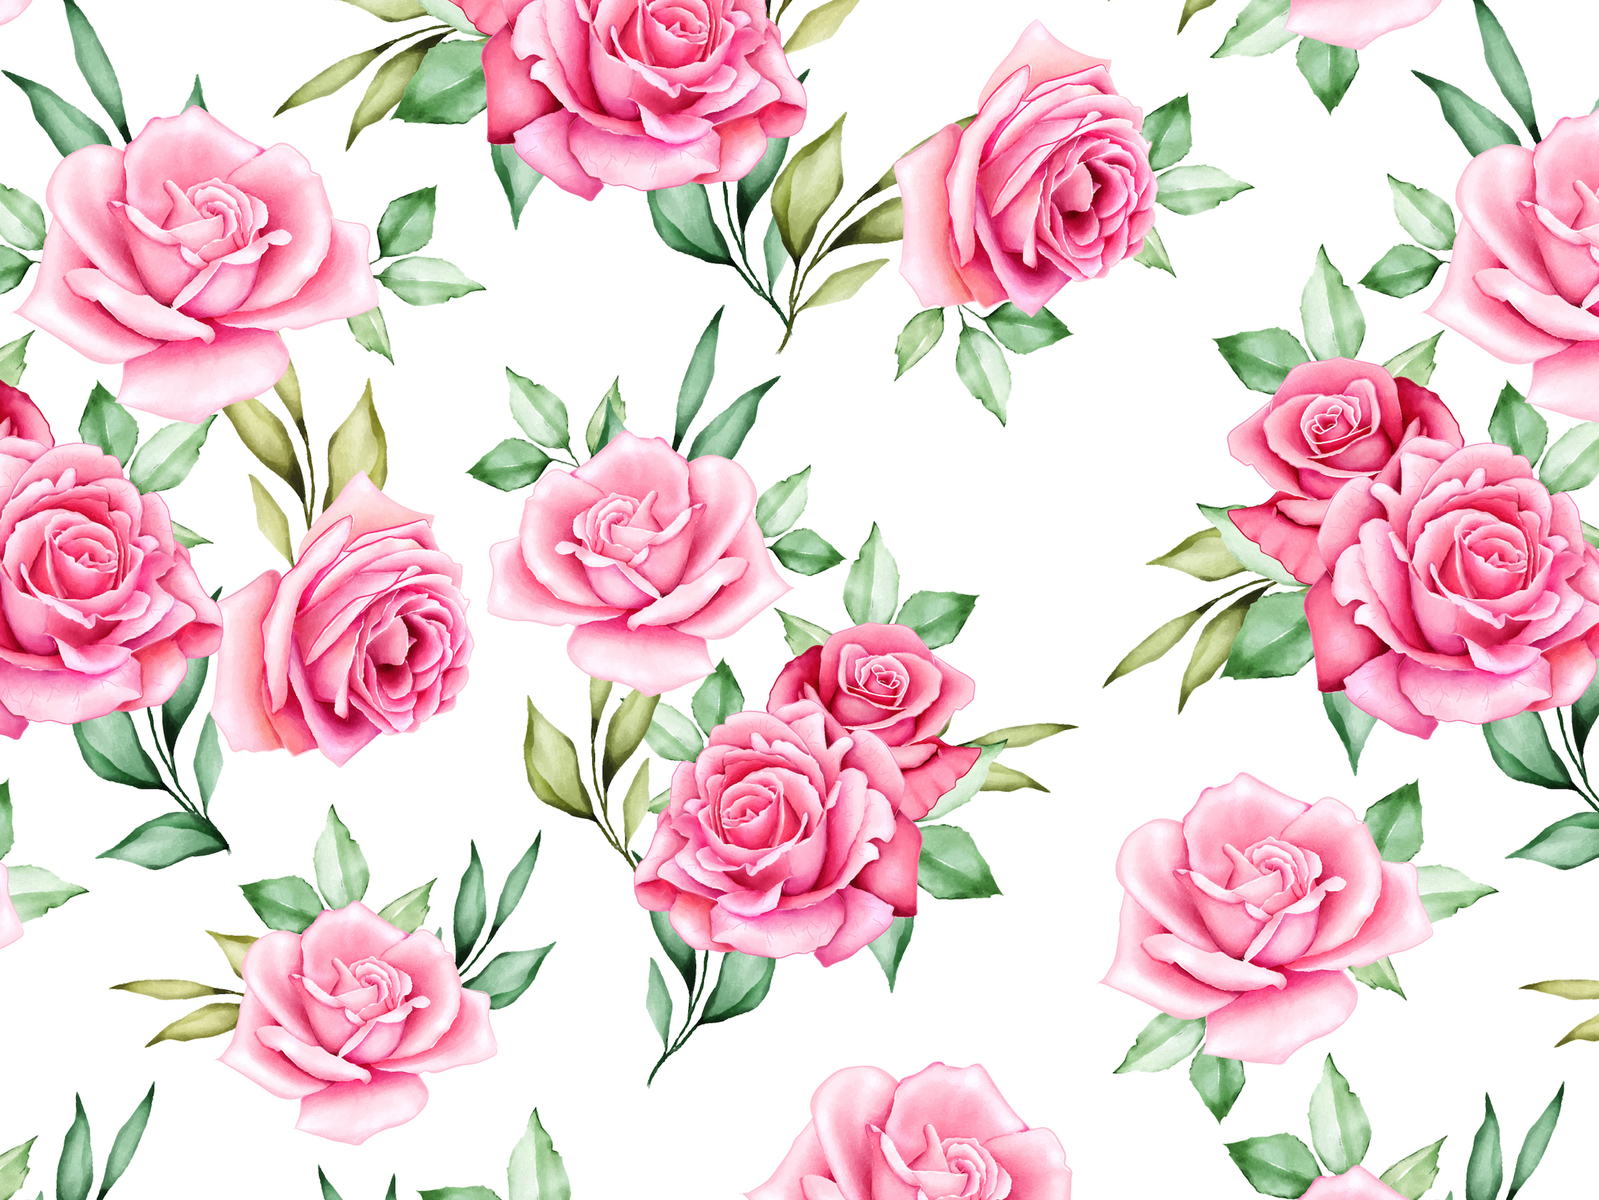 watercolor floral and leaves seamless pattern by volcebyyou Studio on ...